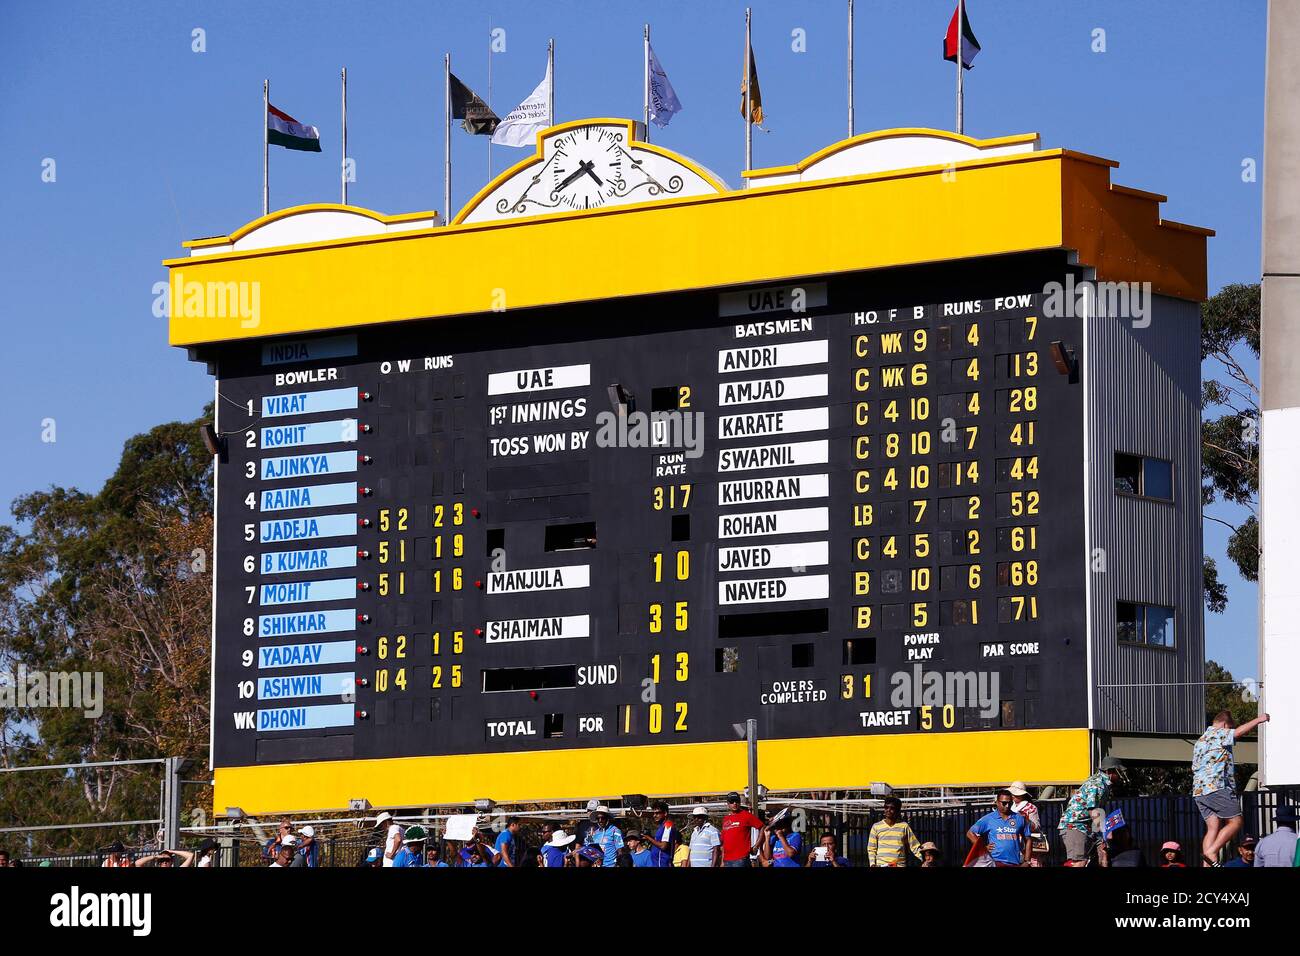 A traditional cricket scoreboard at the WACA ground shows the 102 runs scored by the United Arab Emirates team against India, the lowest score against India in world cups, at their Cricket World Cup match in Perth February 28, 2015.  REUTERS/David Gray (AUSTRALIA - Tags: SPORT CRICKET) Stock Photo